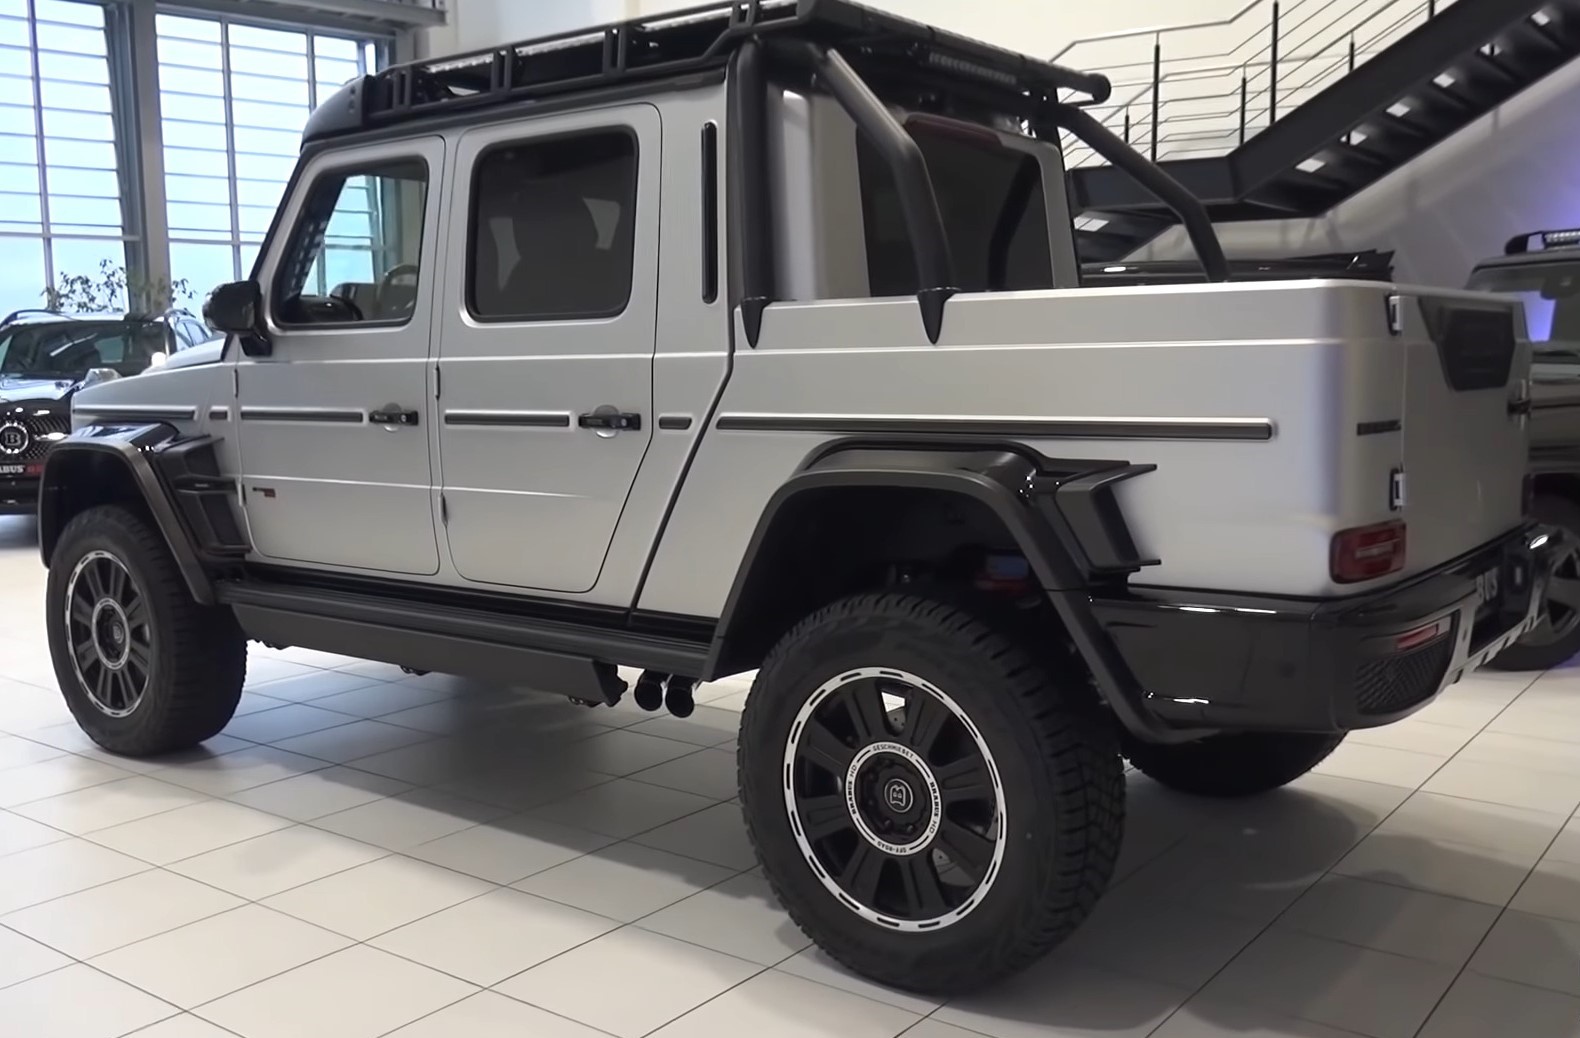 Brabus 800 Adventure XLP is the ultimate AMG G63 😍😍👍👍 #CARS #TopCars #SexyCars #MuscleCars #CarsMagazine